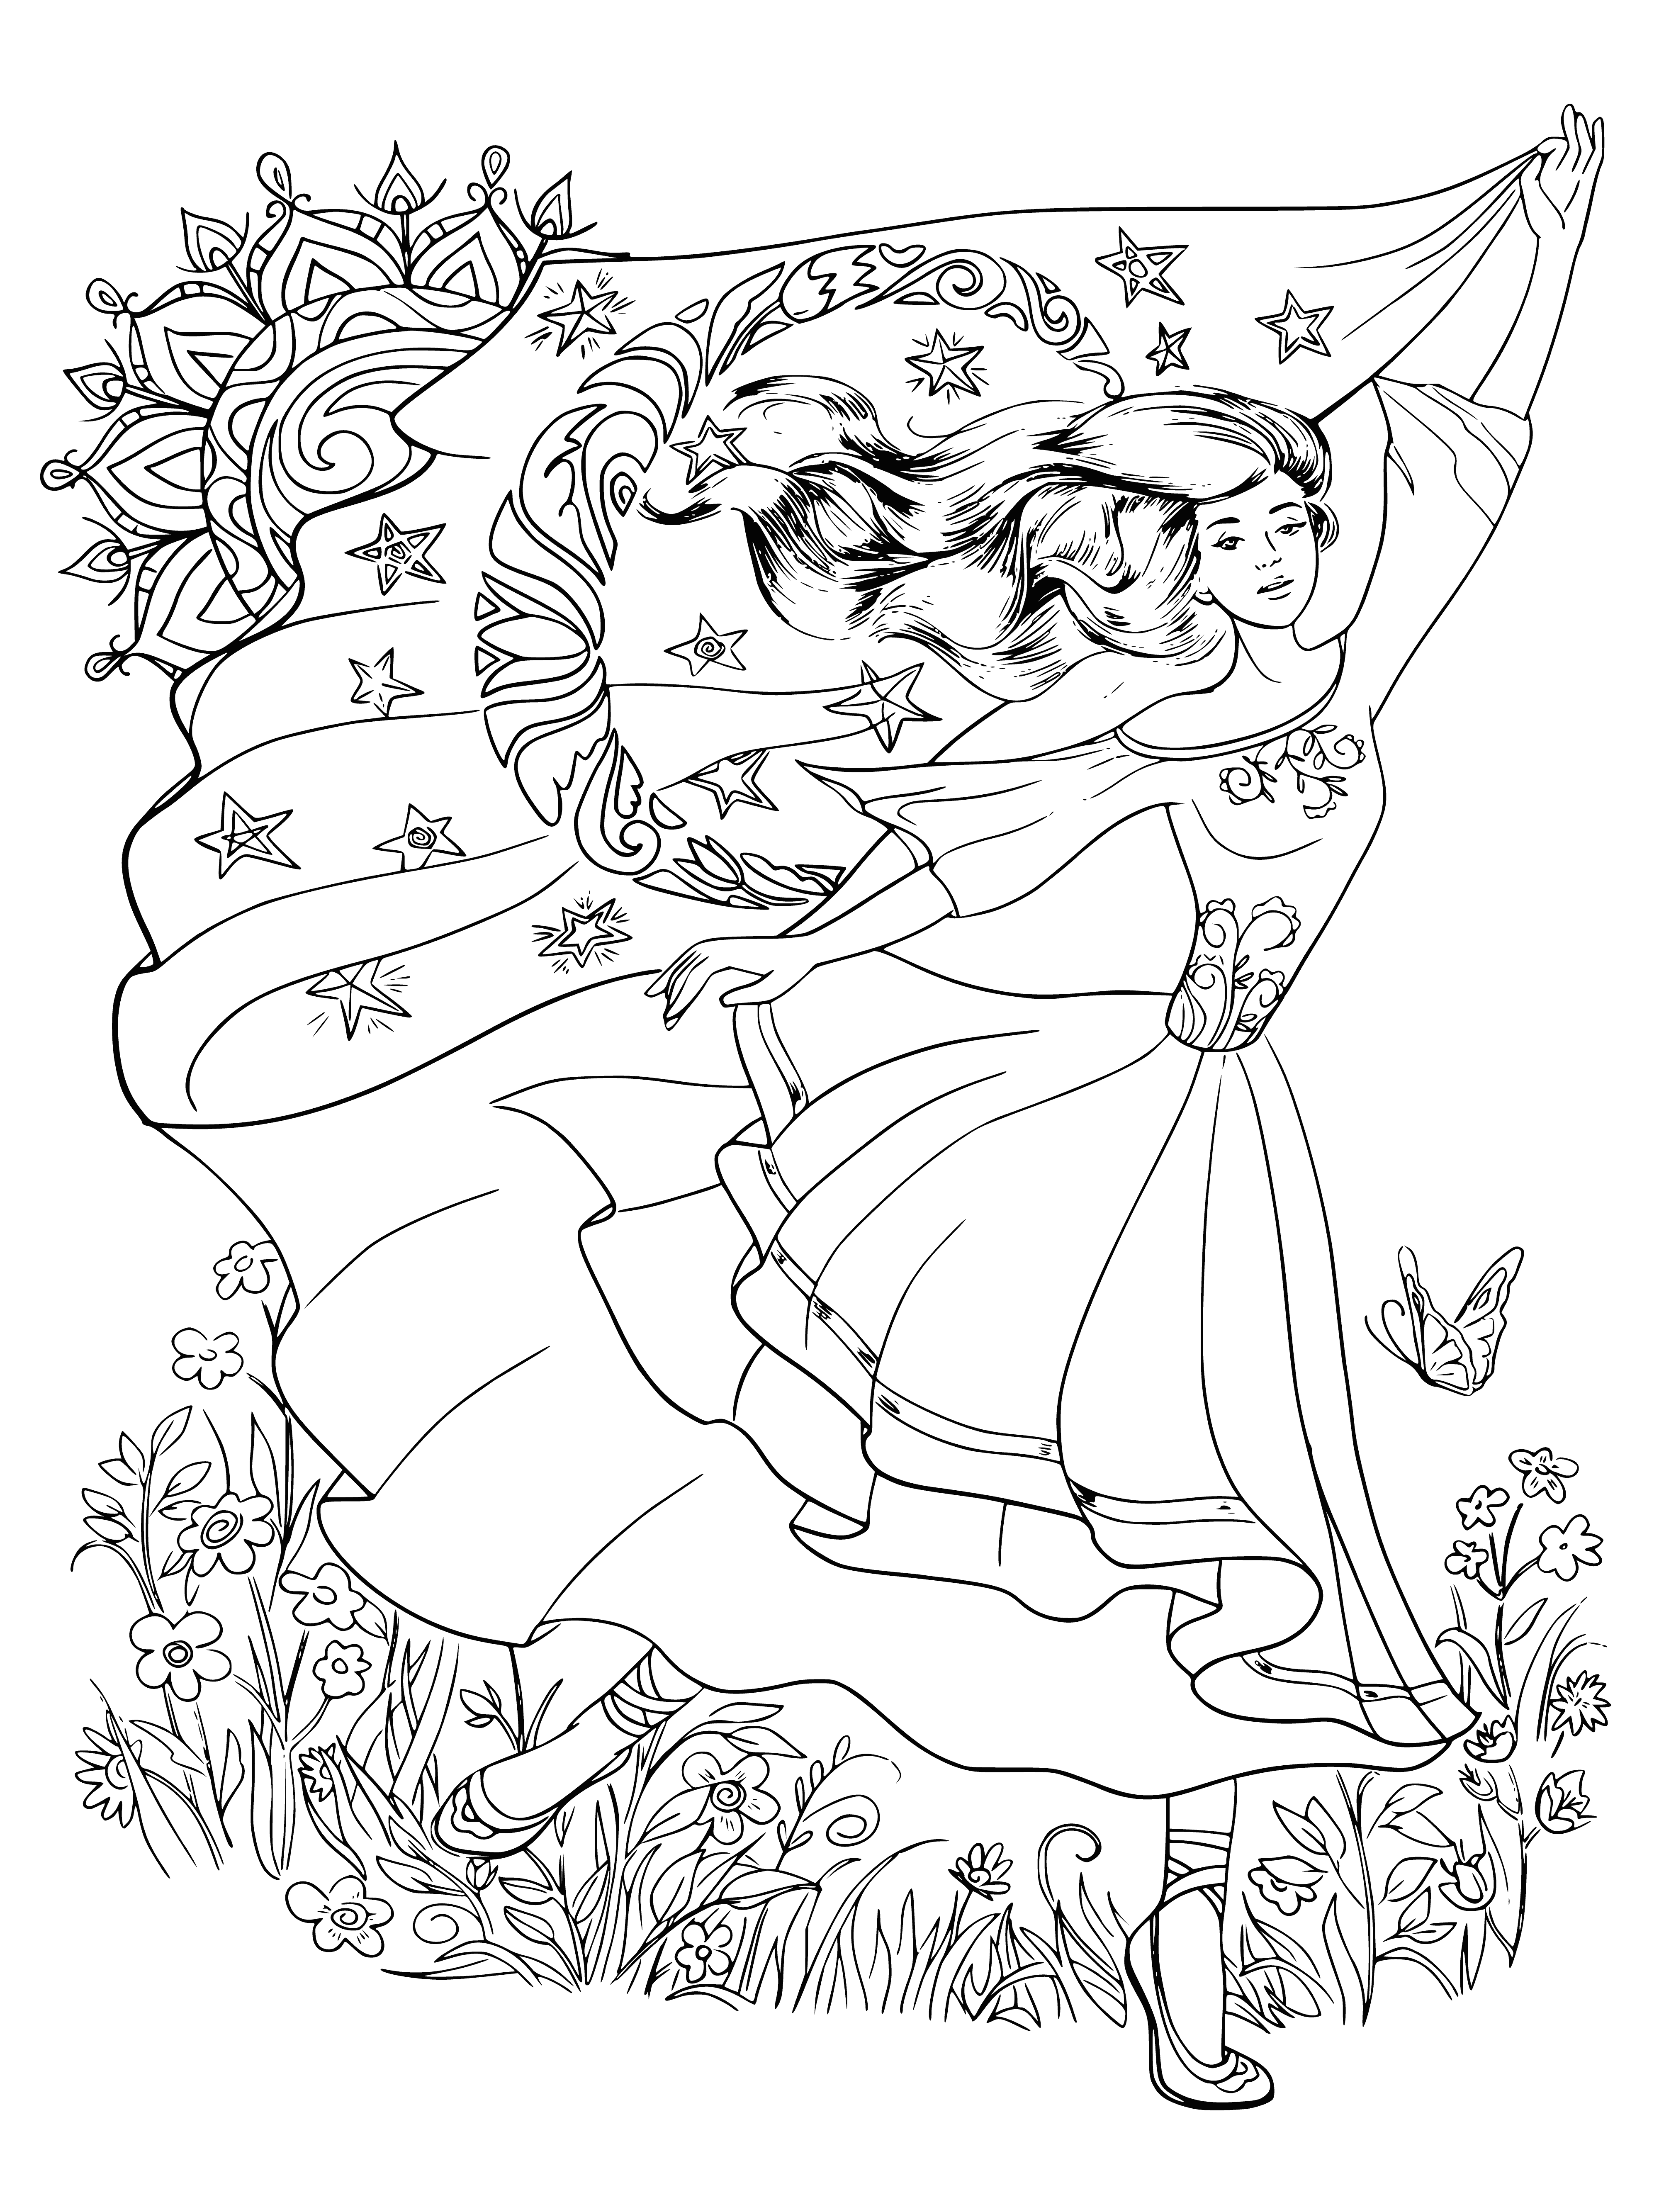 Sun and Moon coloring page